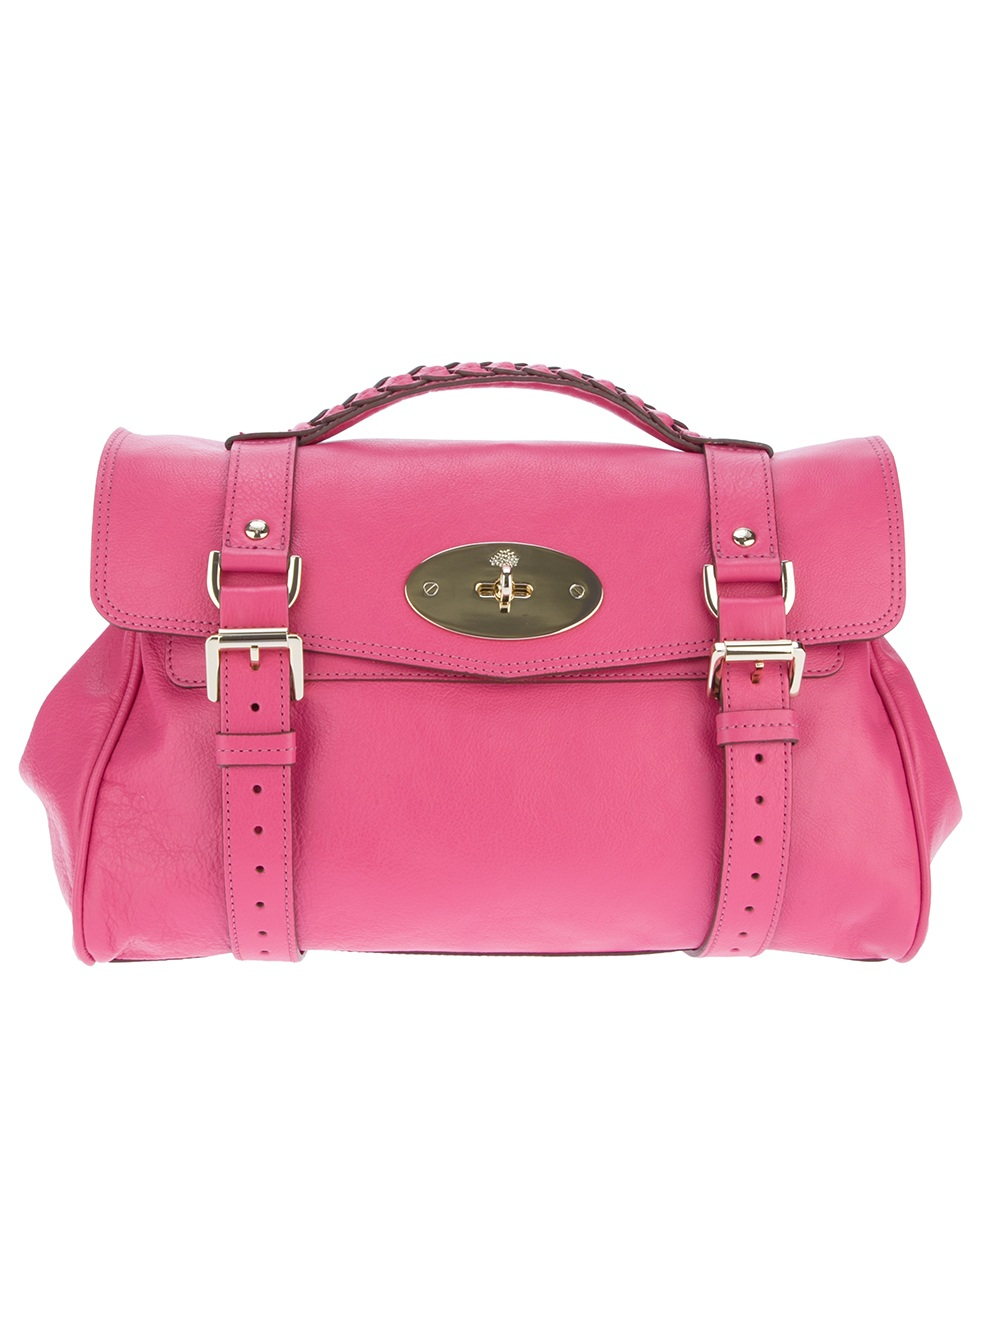 Mulberry Alexa Bag in Pink & Purple (Pink) - Lyst